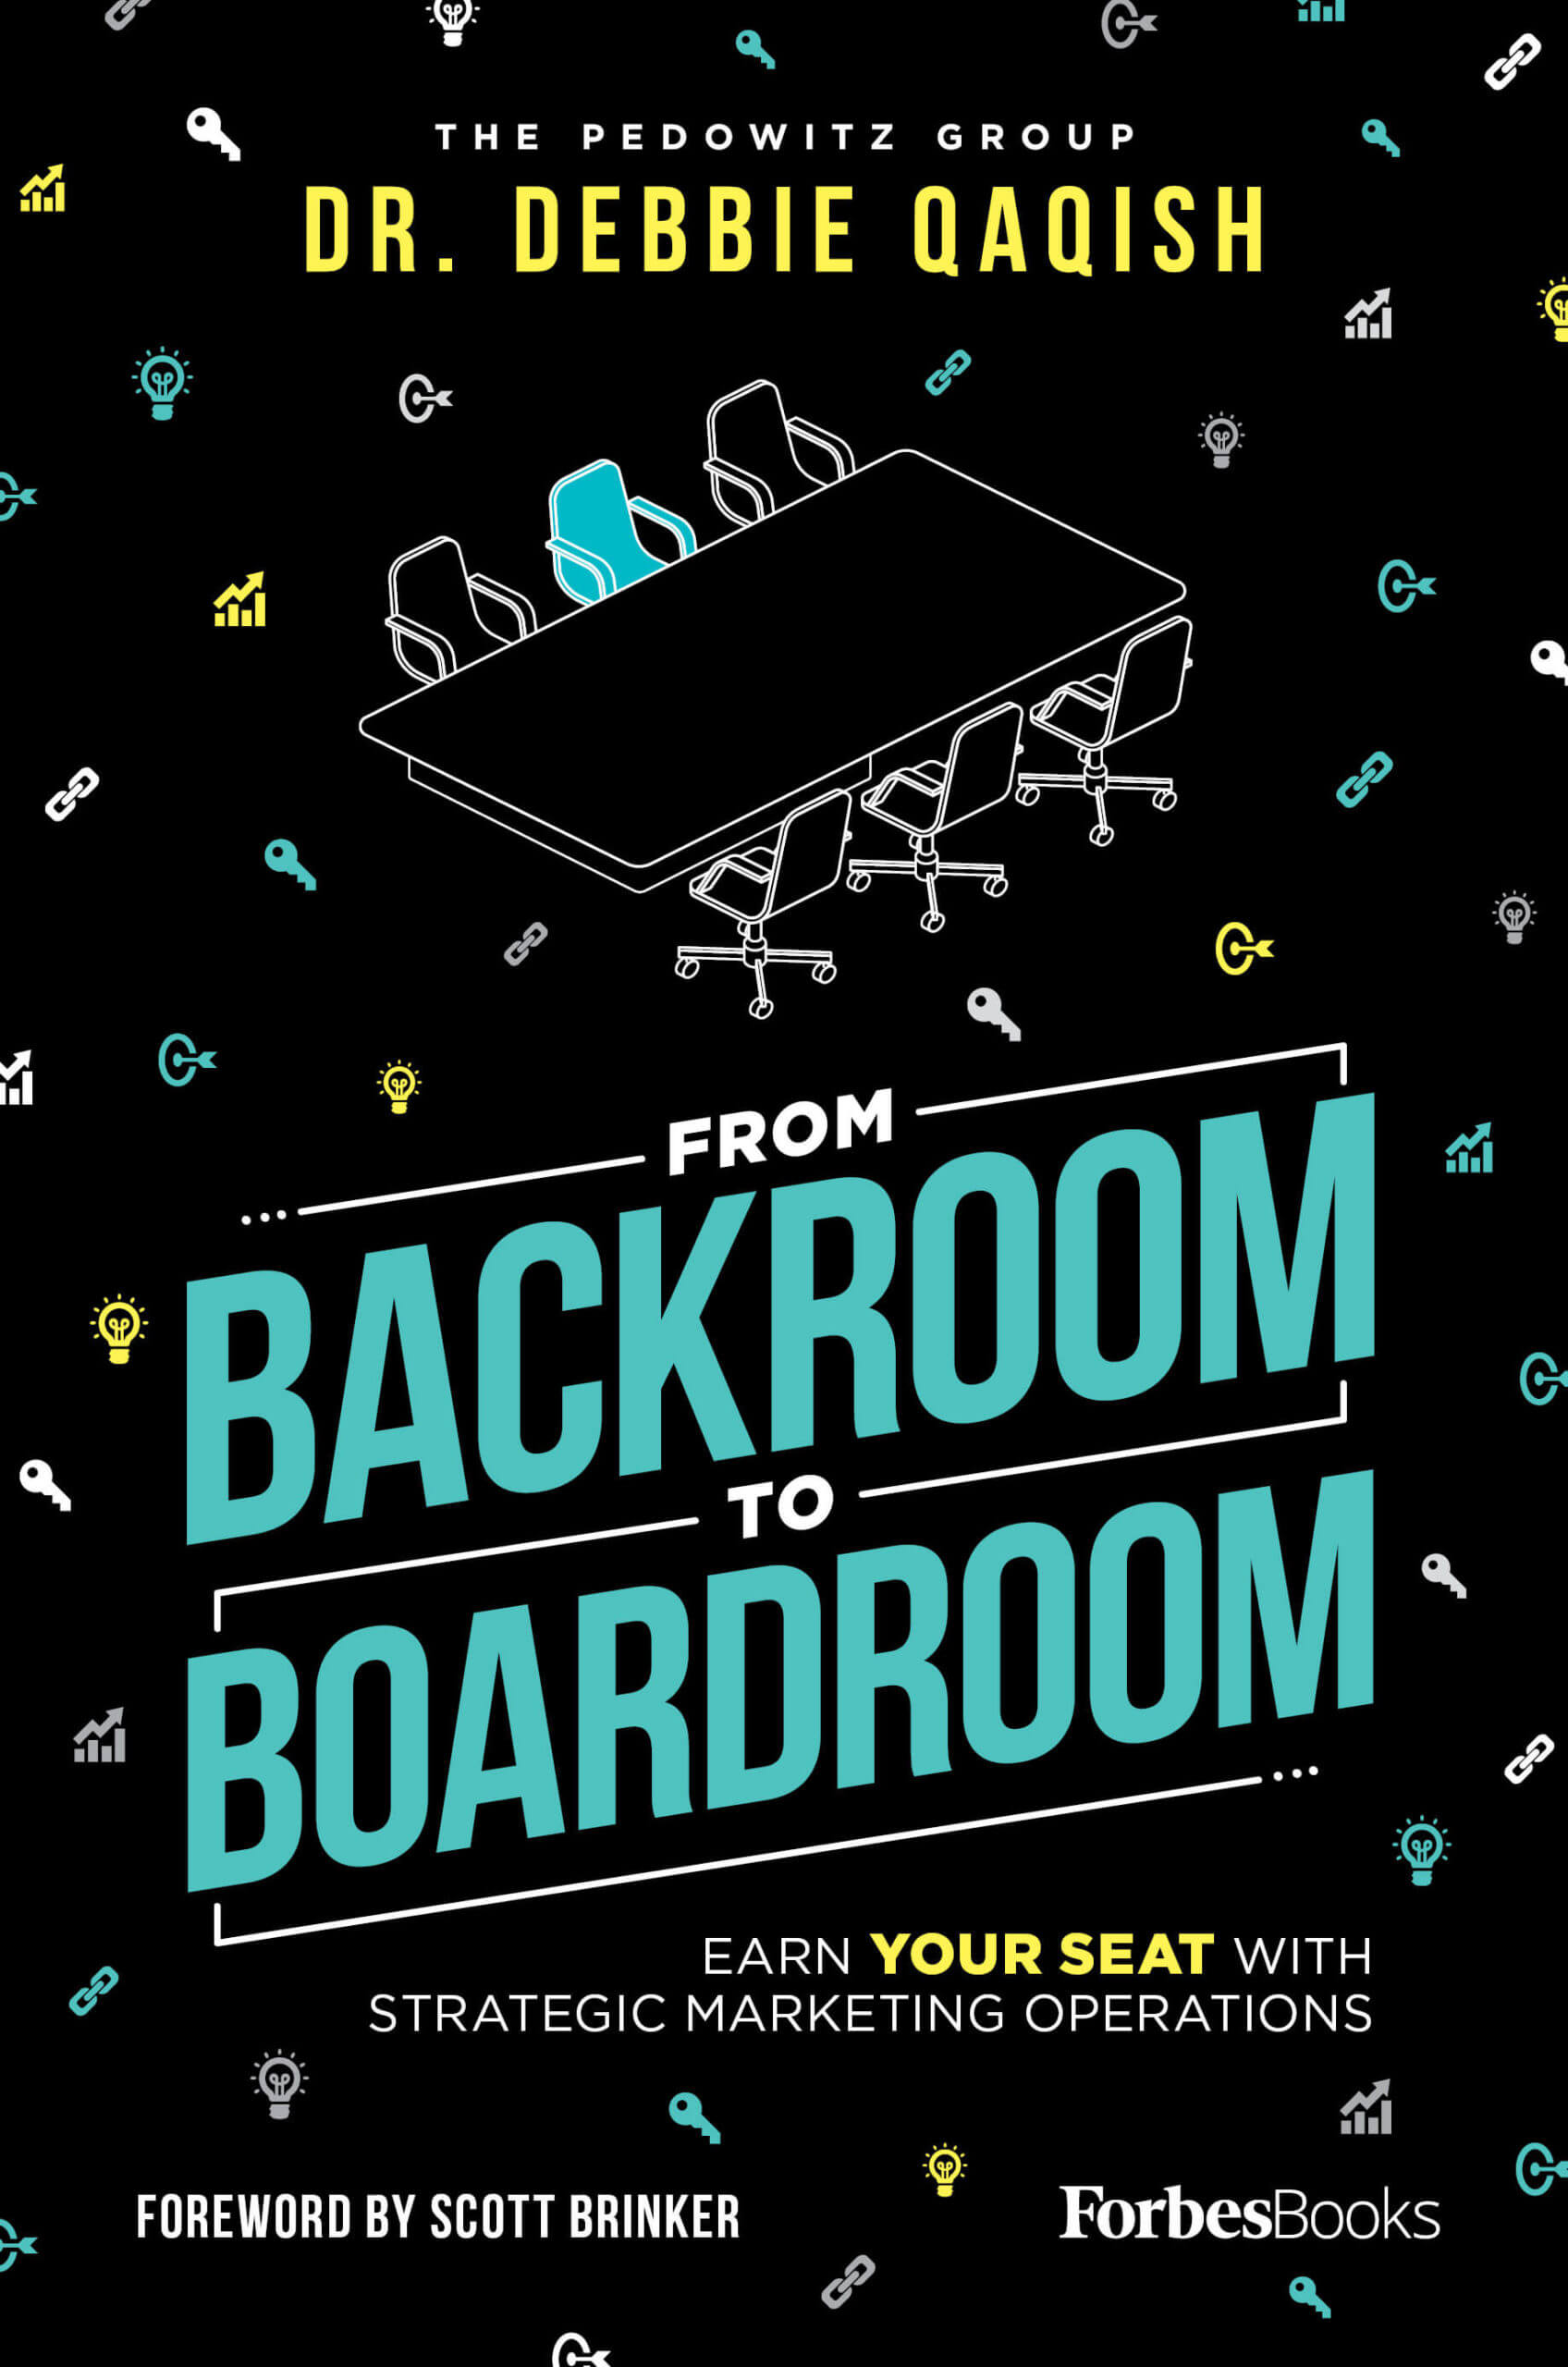 From Backroom To Boardroom is a must-have for marketing leaders!